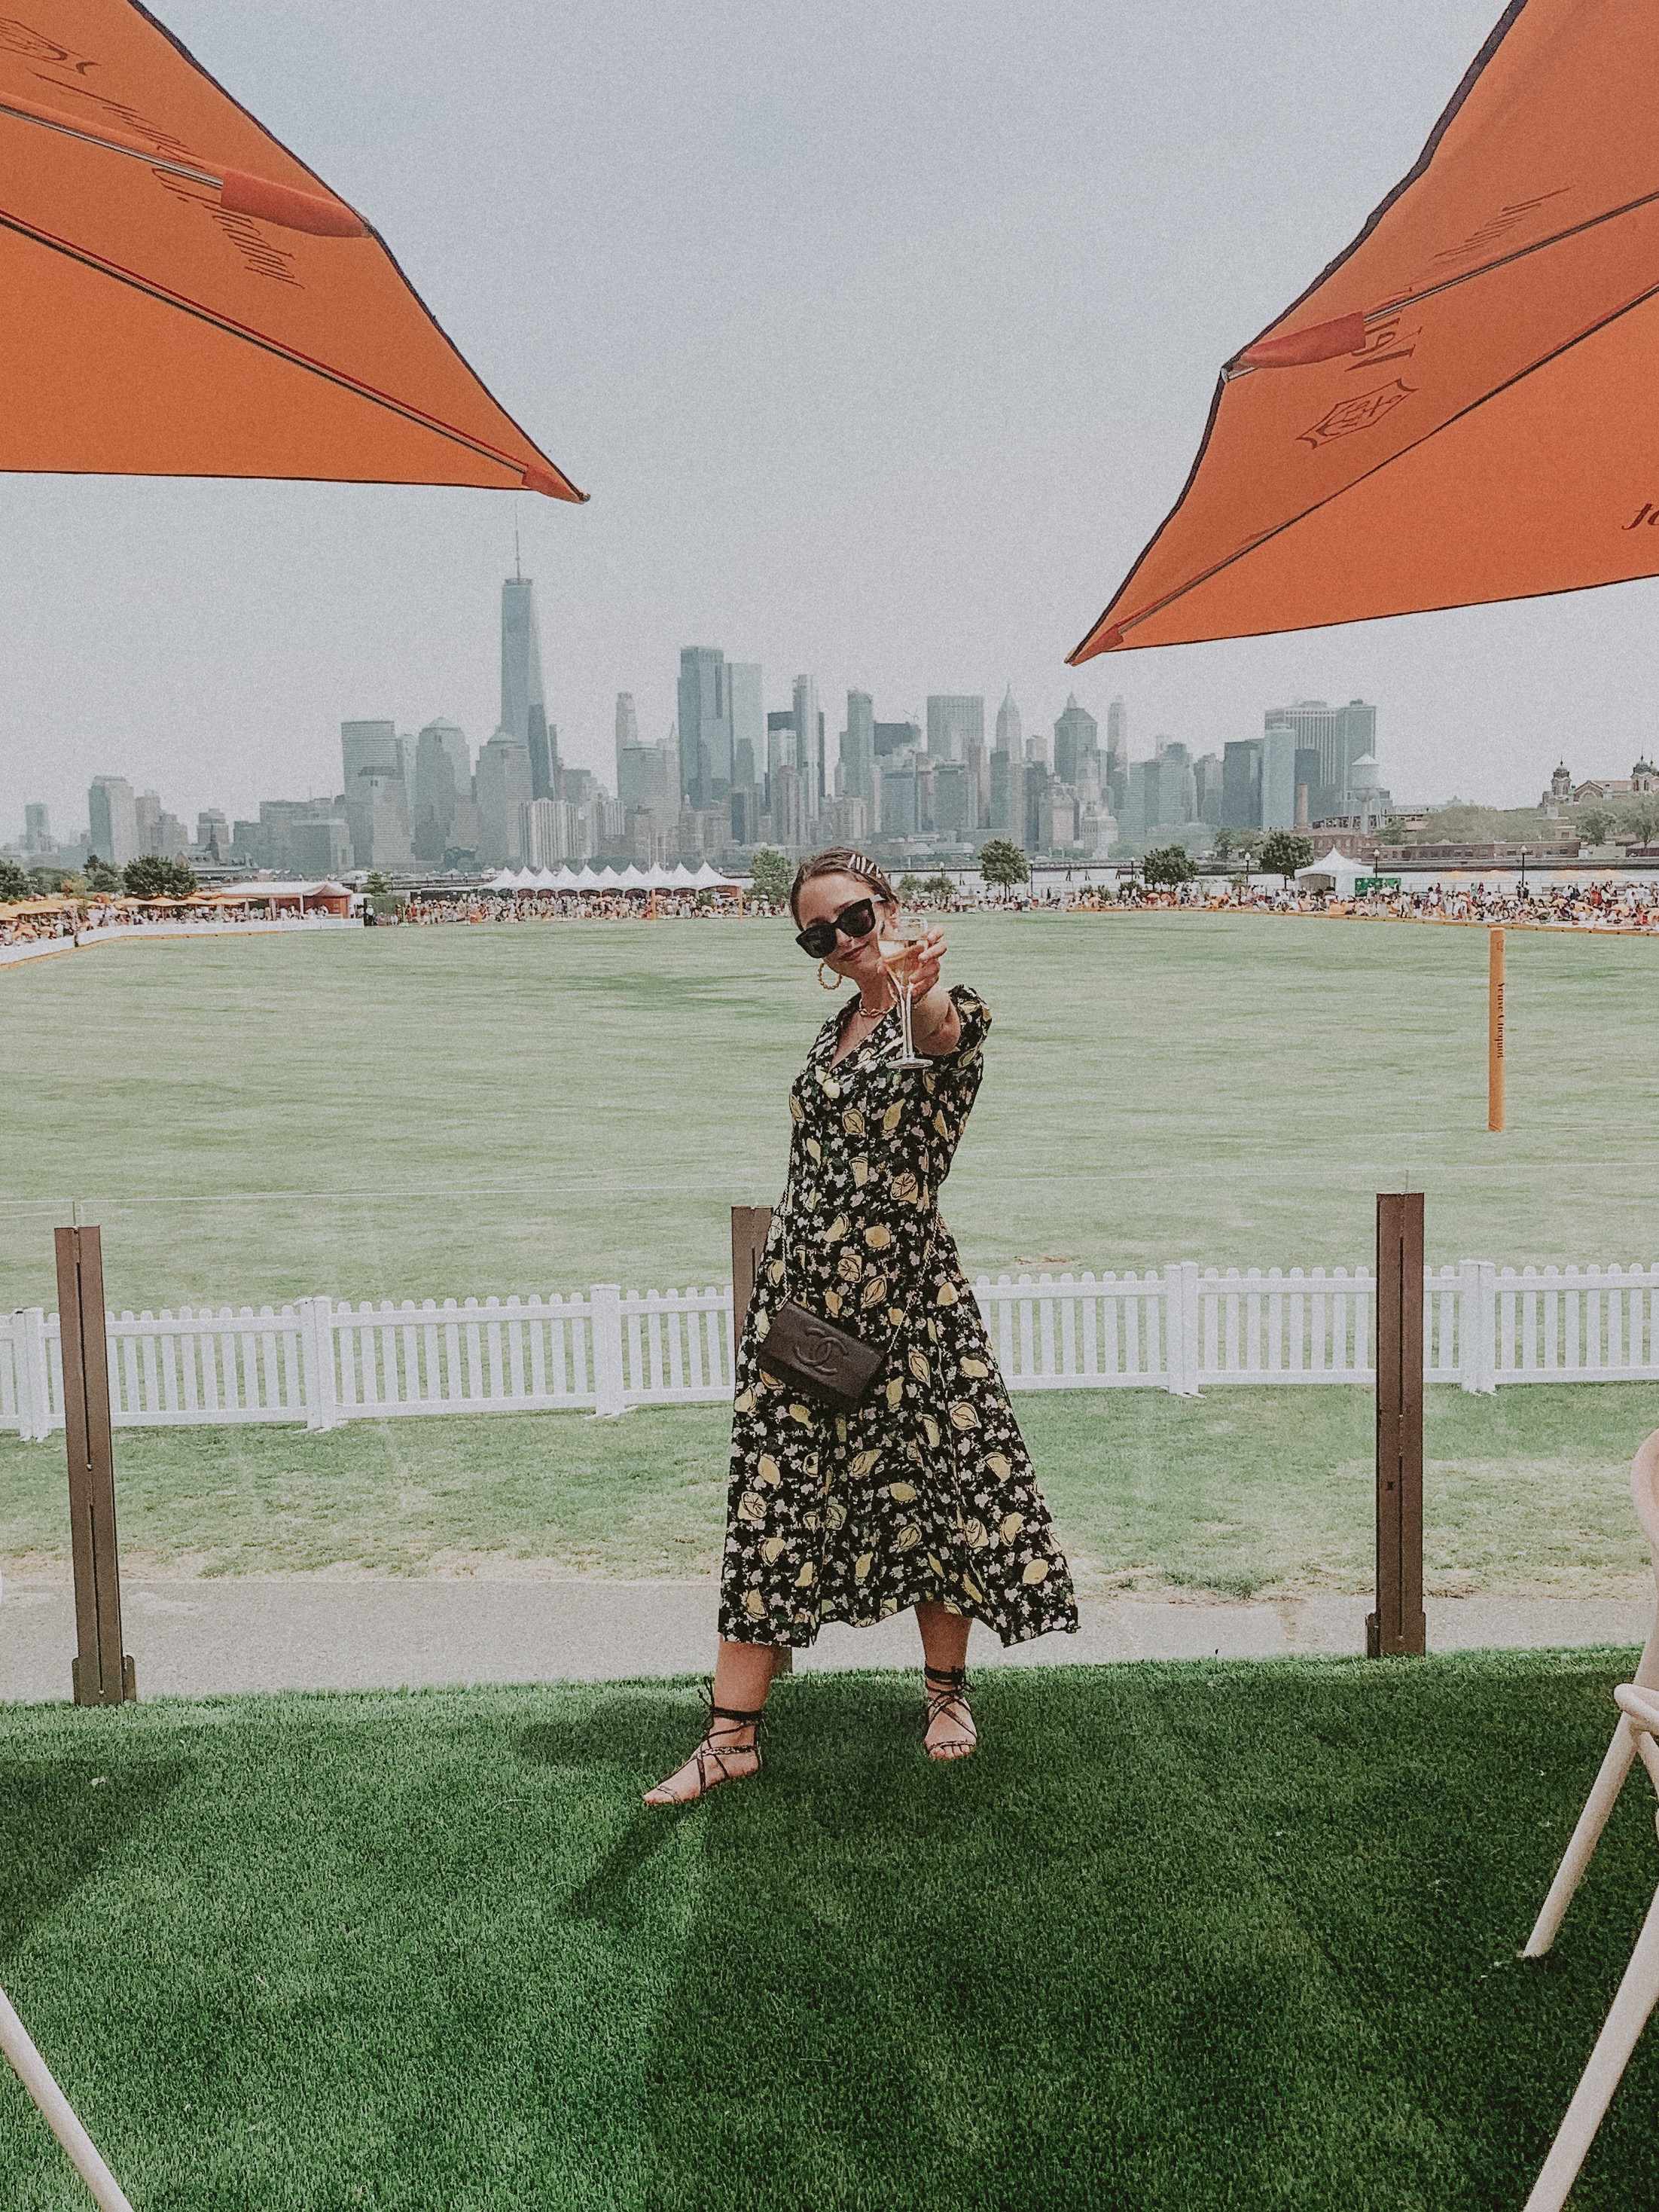 Is It Worth Attending? The Veuve Clicquot Polo Classic